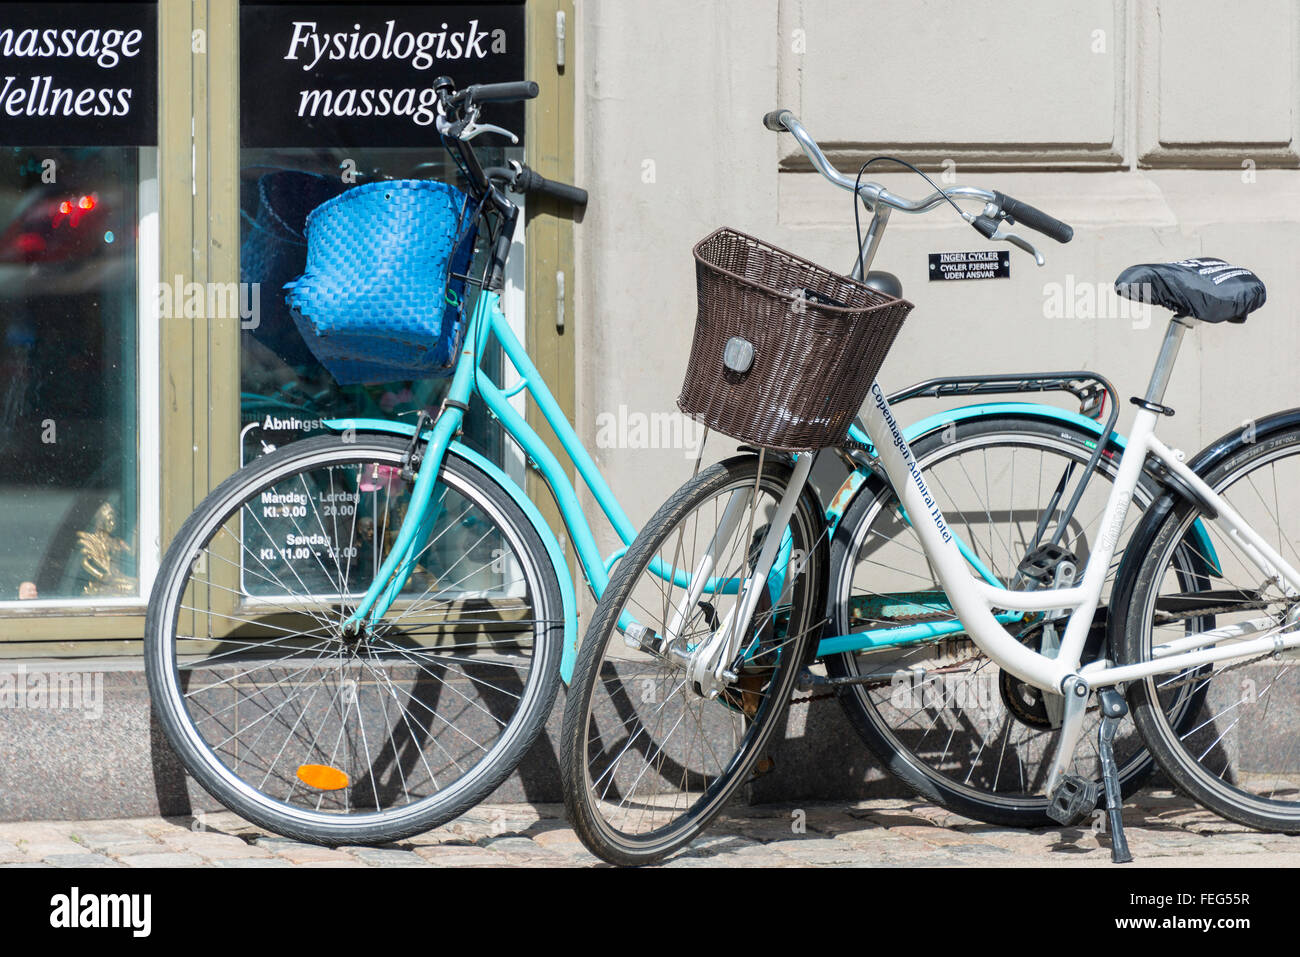 Bicycles Copenhagen High Resolution Stock Photography and Images - Alamy